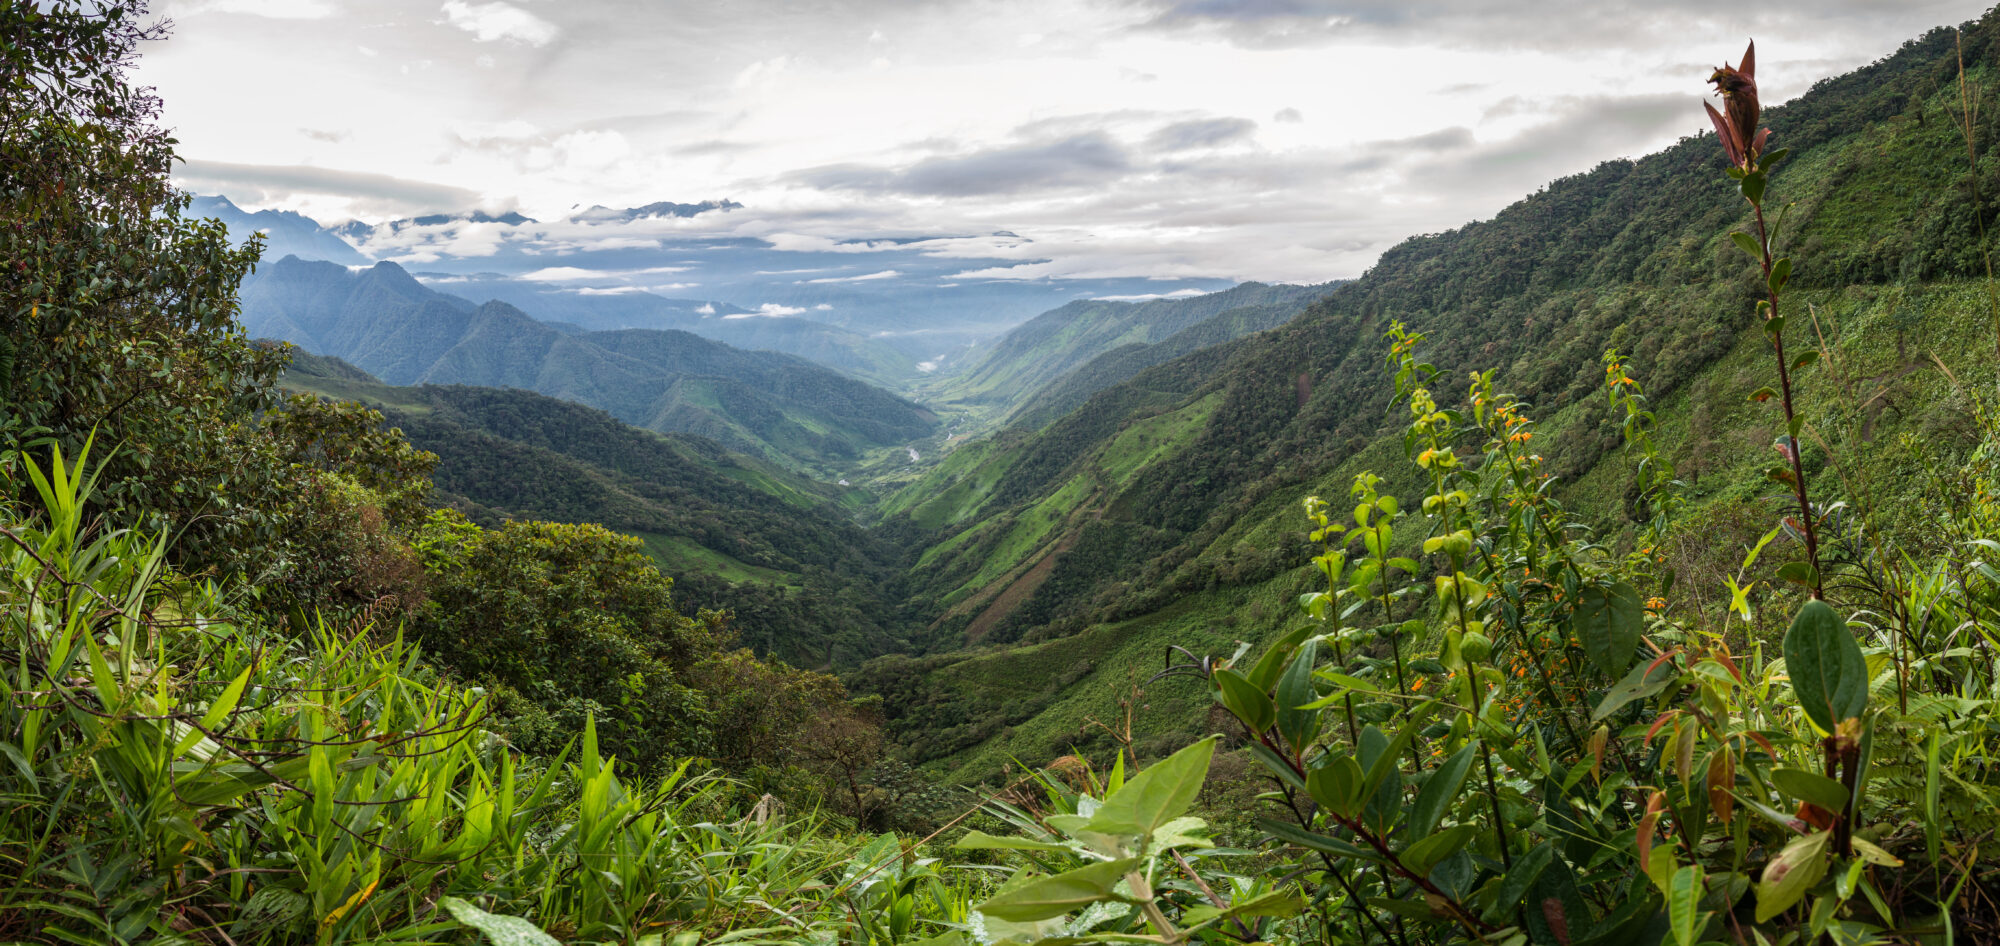 <p>Hills of the Andes in Colombia, where the largest proportion of attacks on environmental defenders occur. (image: Alamy)</p>